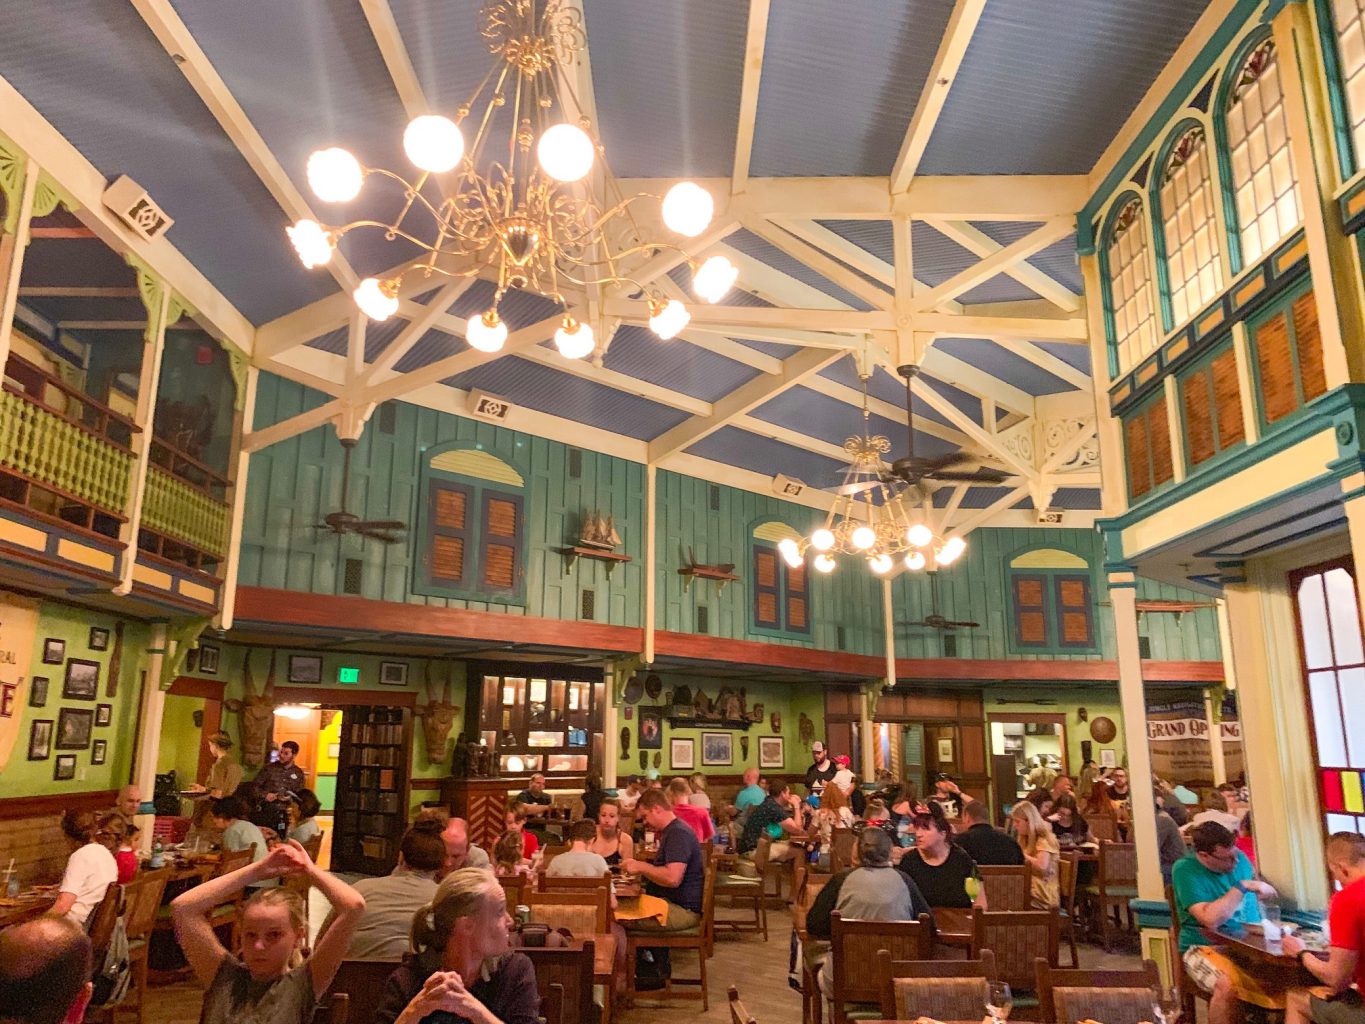 The rustic western dining area of Skippers Canteen is green, white, and brown, and in this photo, booths and tables are filled to capacity. No wonder this is one of the best restaurants in Magic Kingdom!